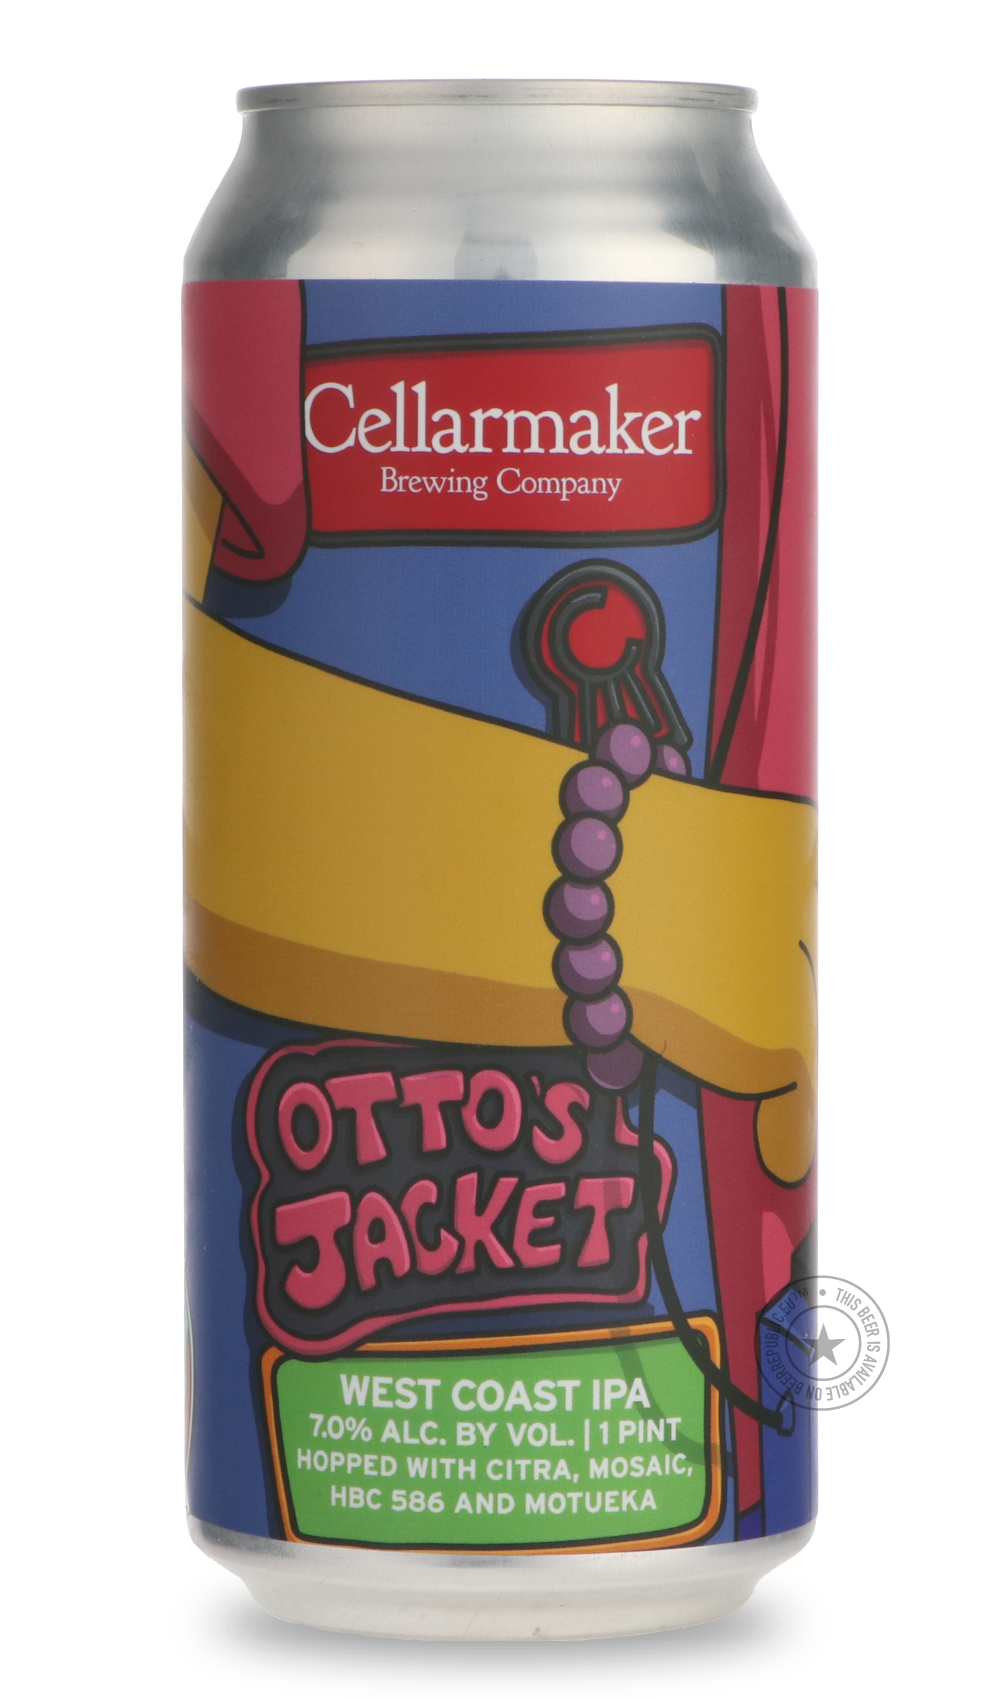 -Cellarmaker- Otto's Jacket-IPA- Only @ Beer Republic - The best online beer store for American & Canadian craft beer - Buy beer online from the USA and Canada - Bier online kopen - Amerikaans bier kopen - Craft beer store - Craft beer kopen - Amerikanisch bier kaufen - Bier online kaufen - Acheter biere online - IPA - Stout - Porter - New England IPA - Hazy IPA - Imperial Stout - Barrel Aged - Barrel Aged Imperial Stout - Brown - Dark beer - Blond - Blonde - Pilsner - Lager - Wheat - Weizen - Amber - Barle